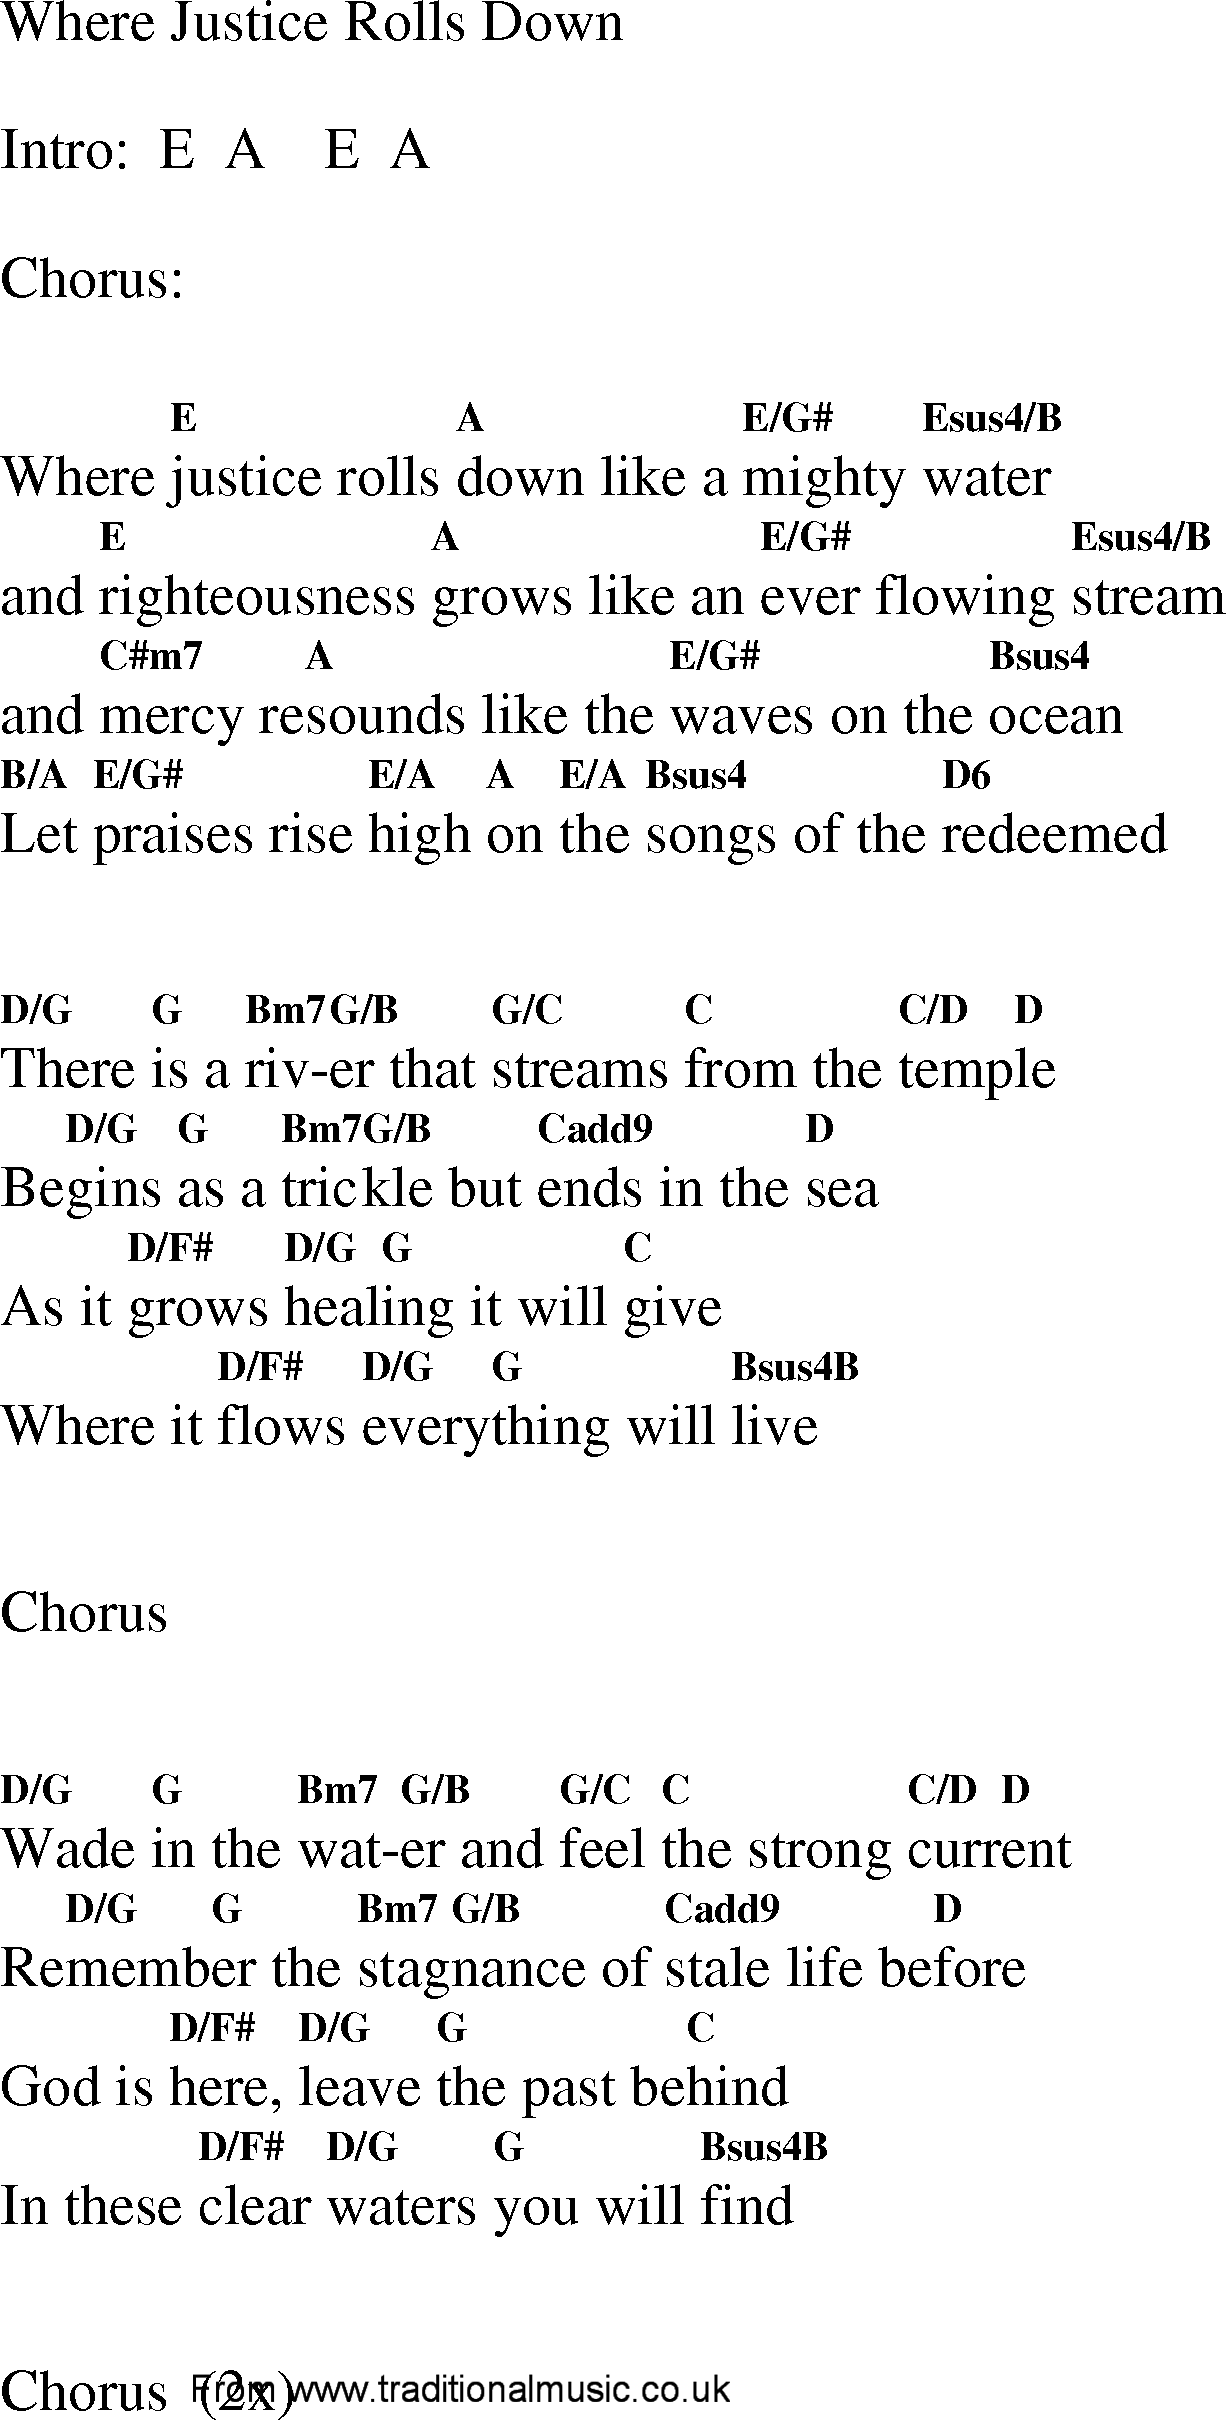 Gospel Song: where_justice_rolls_down, lyrics and chords.